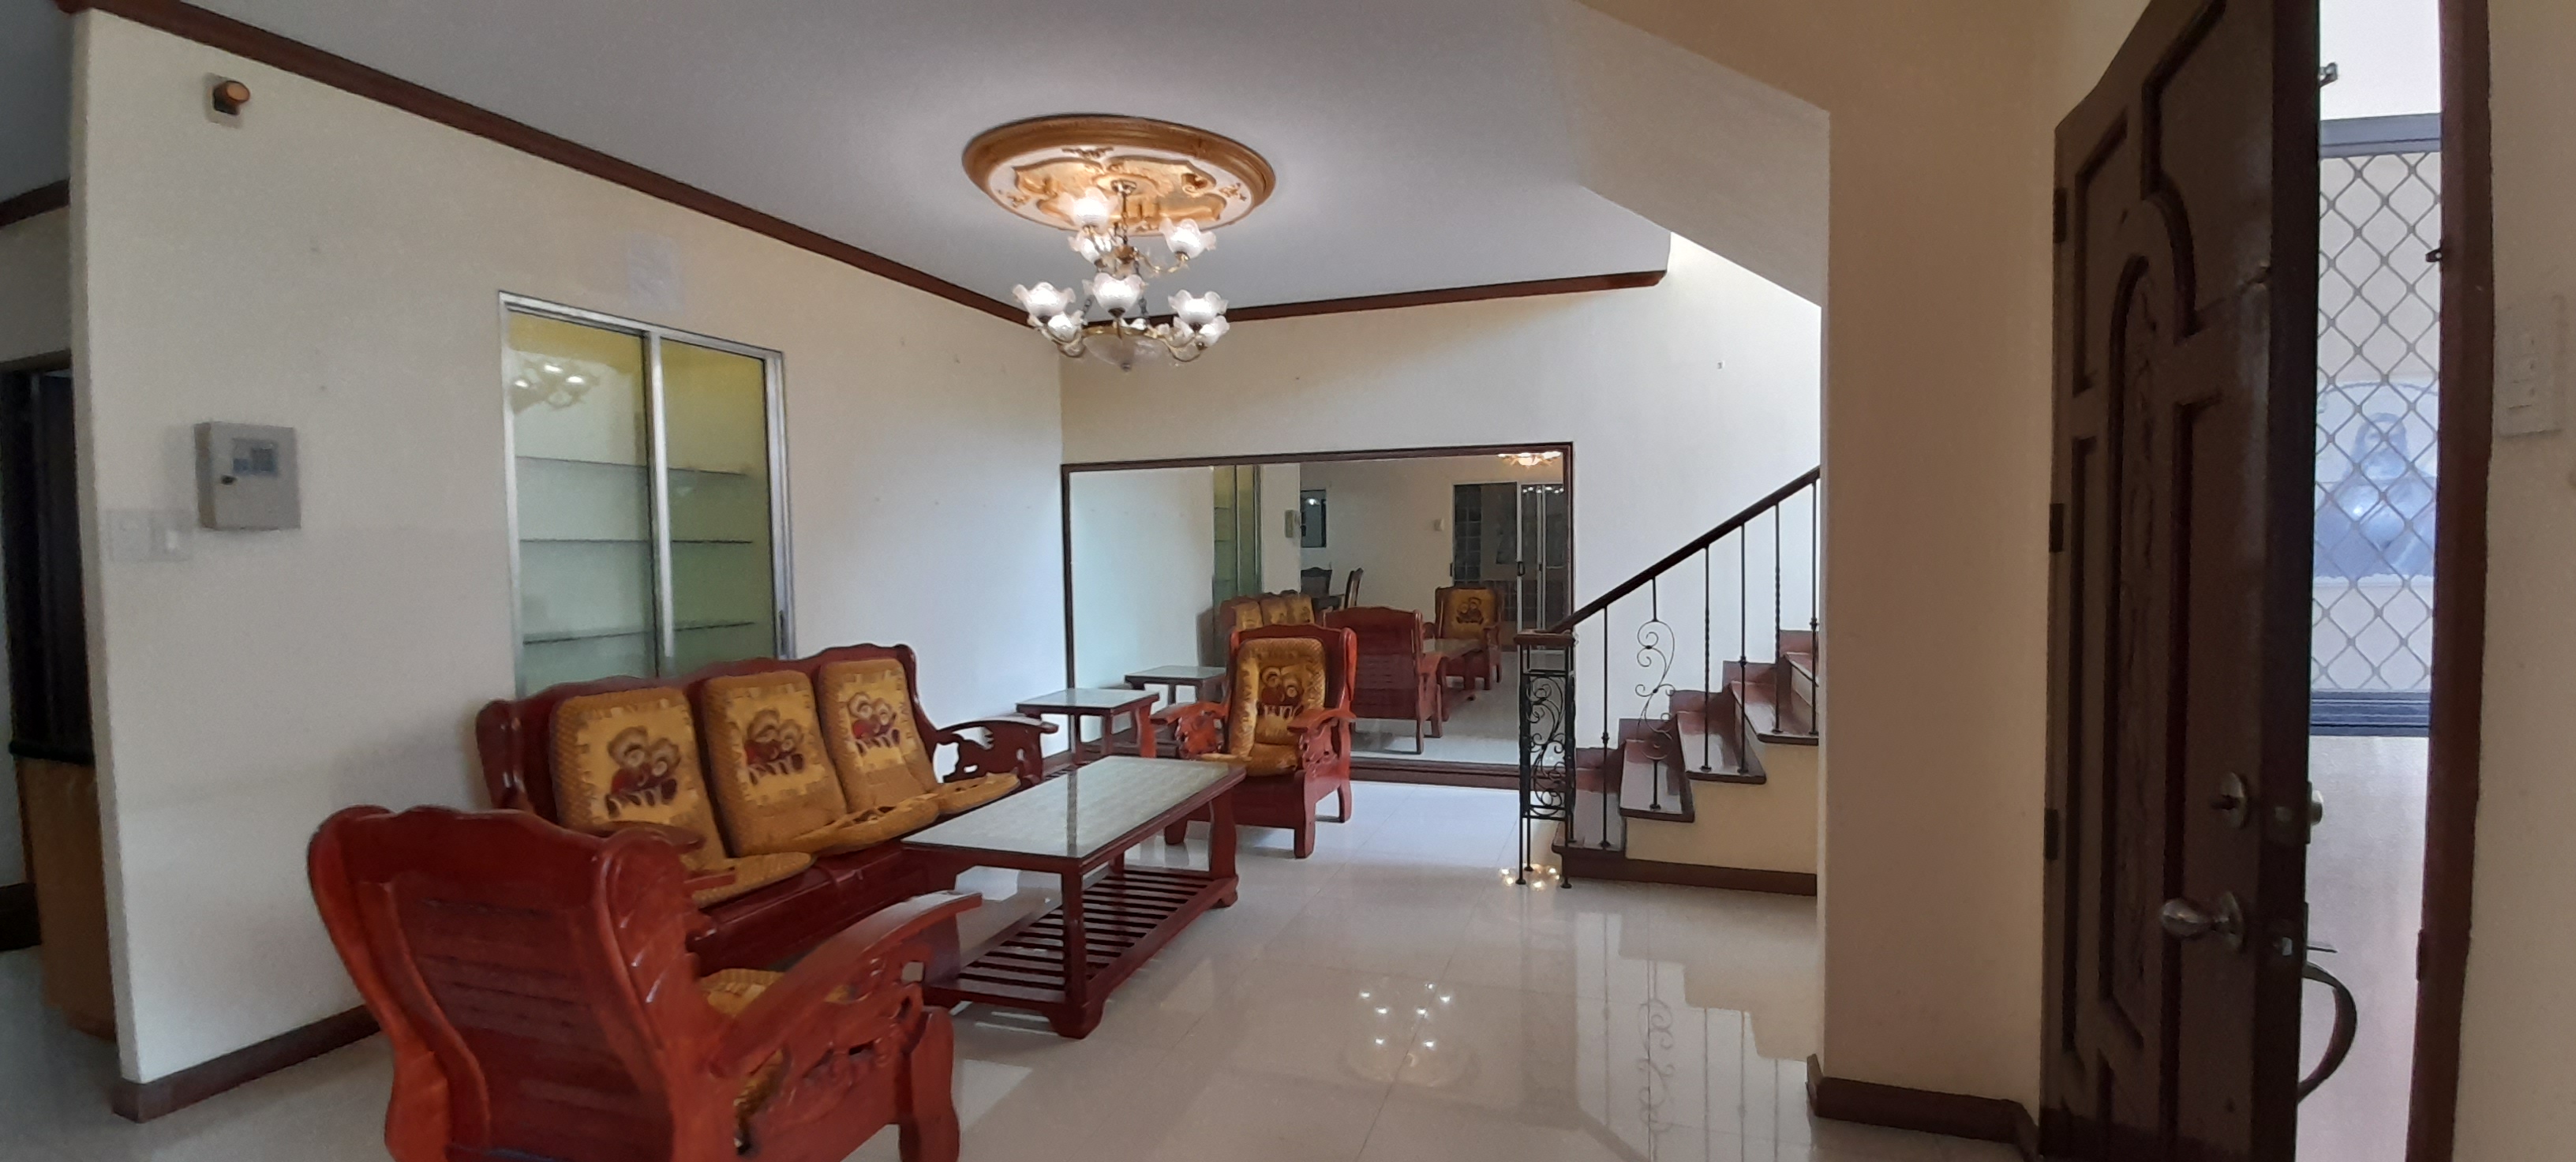 rush-sale-house-and-lot-in-banawa-cebu-city-4-bedrooms-house-with-attic